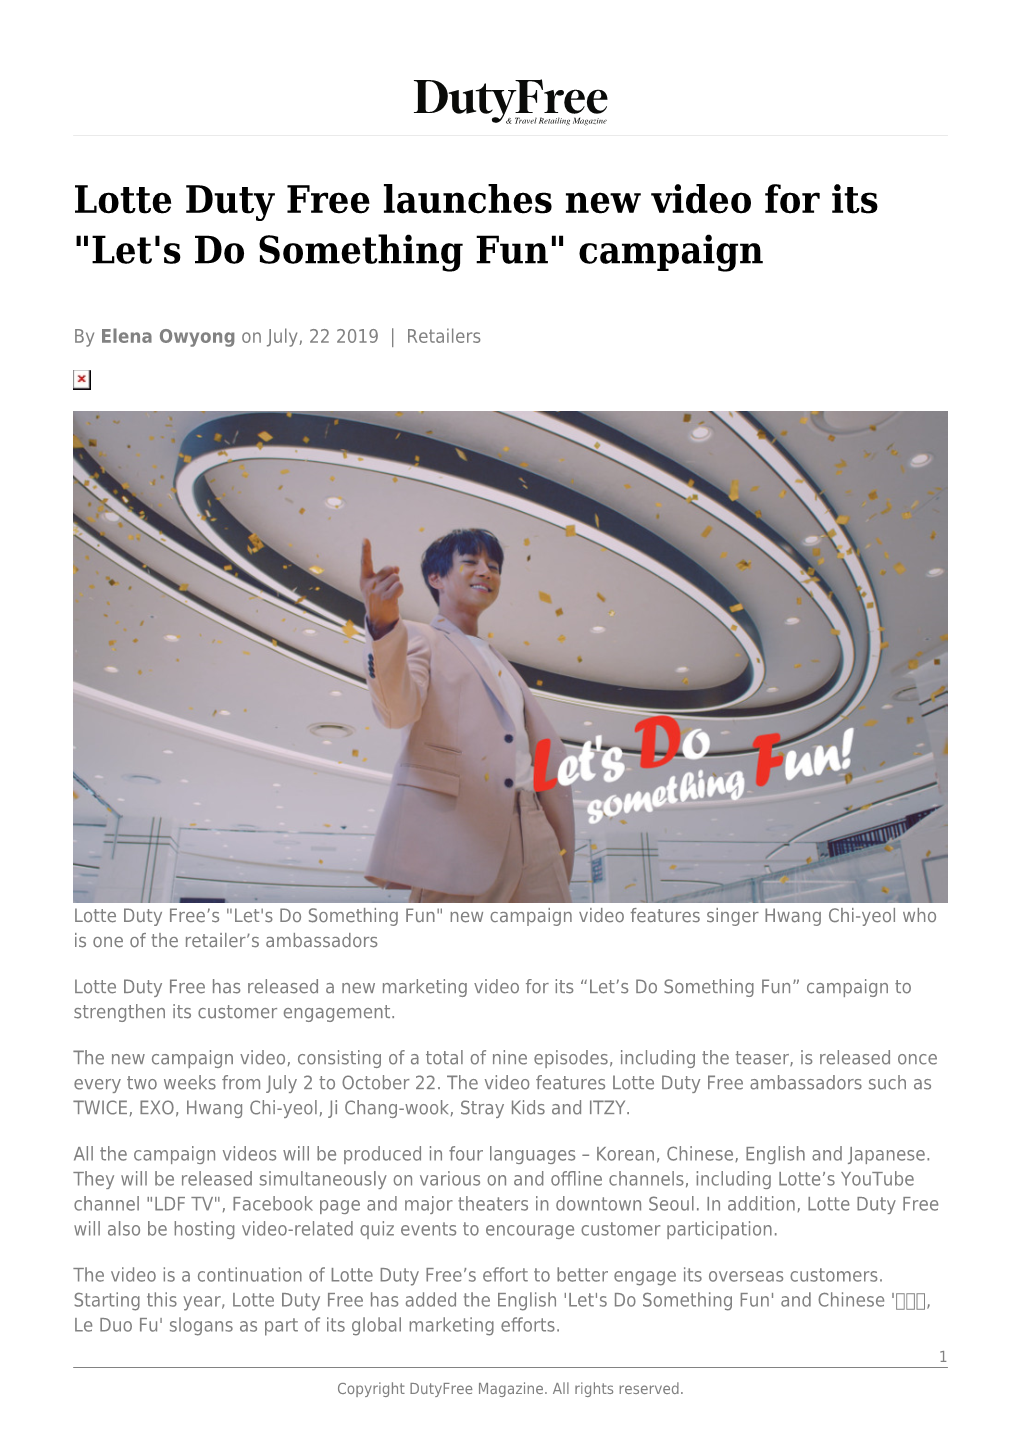 Lotte Duty Free Launches New Video for Its "Let's Do Something Fun" Campaign